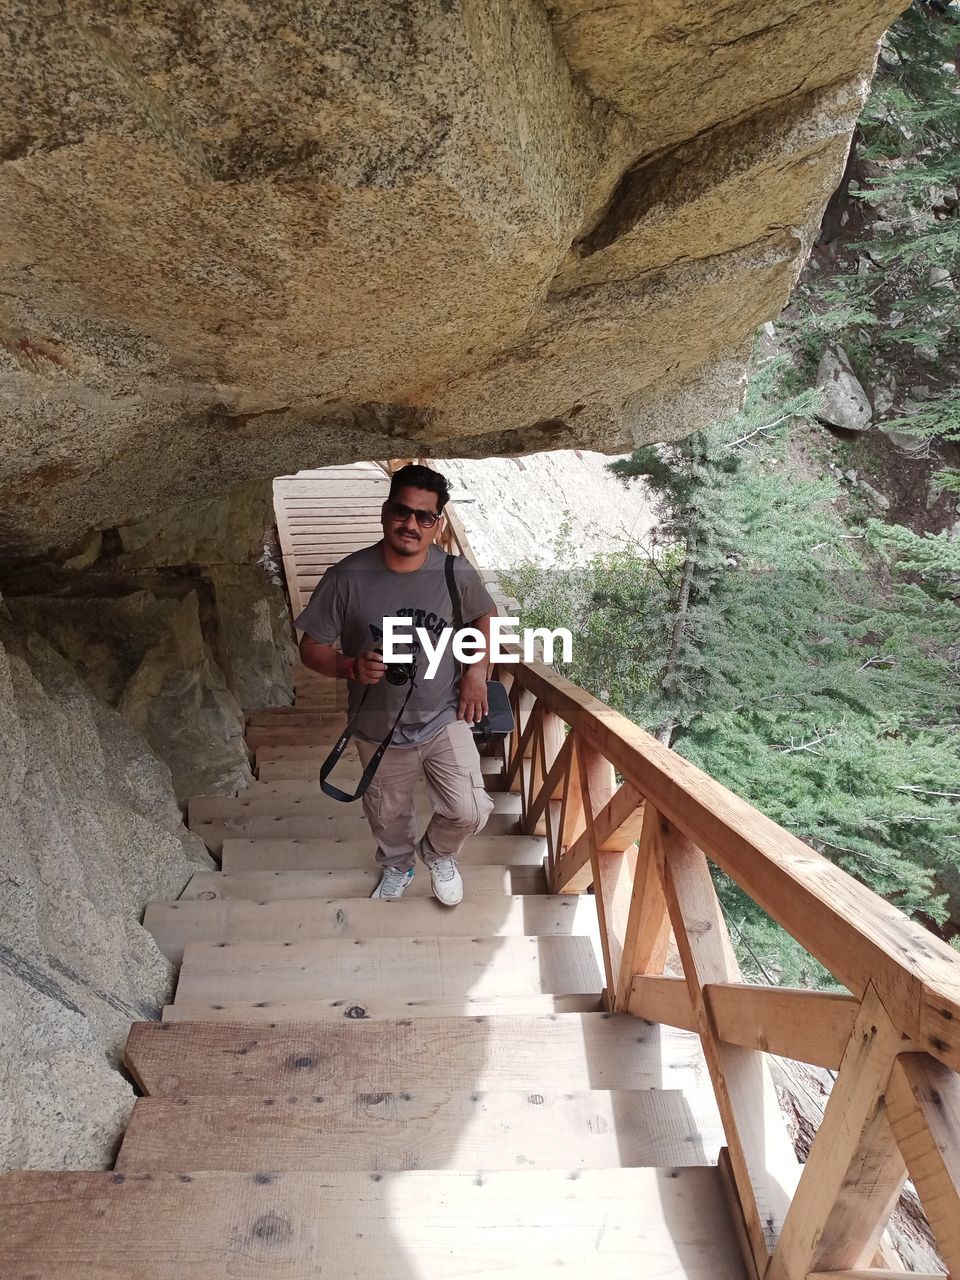 full length, one person, leisure activity, adult, nature, lifestyles, architecture, men, front view, casual clothing, day, young adult, rock, staircase, cave, standing, outdoors, railing, travel, sunlight, high angle view, wood, sunglasses, looking at camera, built structure, adventure, portrait, rock formation, activity, women, bridge, glasses, vacation, wadi, land, trip, smiling, steps and staircases, holiday, person, walking, fashion